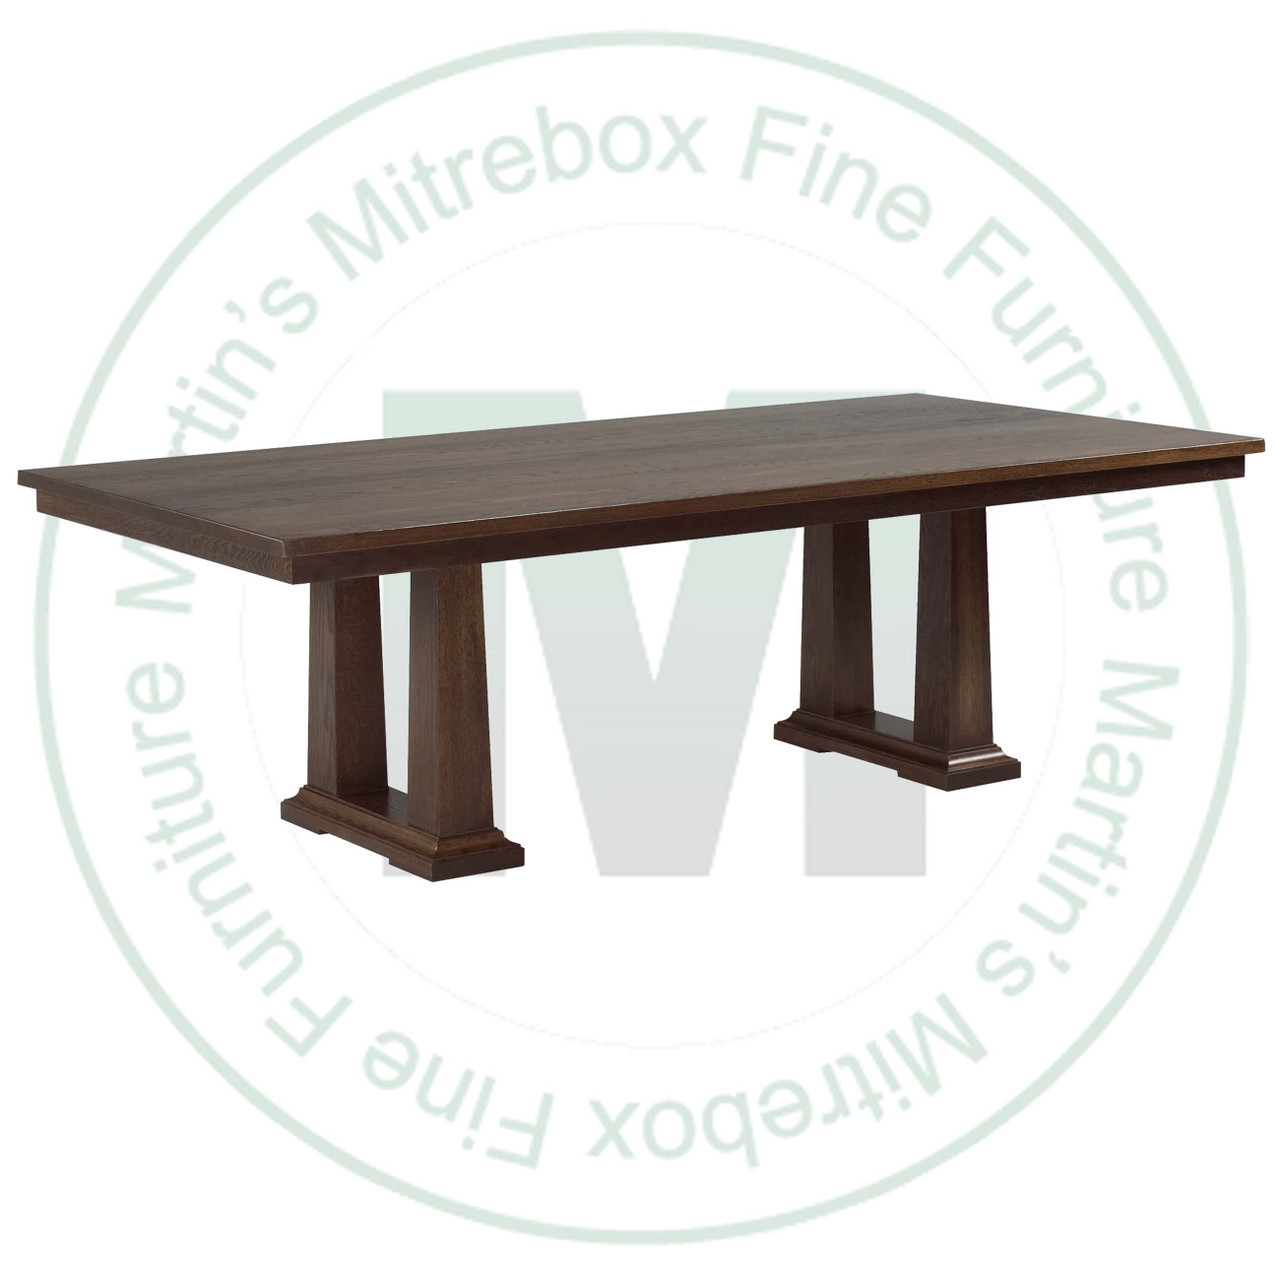 Wormy Maple Acropolis Solid Top Double Pedestal Table 42''D x 72''W x 30''H Table Has 1.25'' Thick Top With 16'' Extensions.